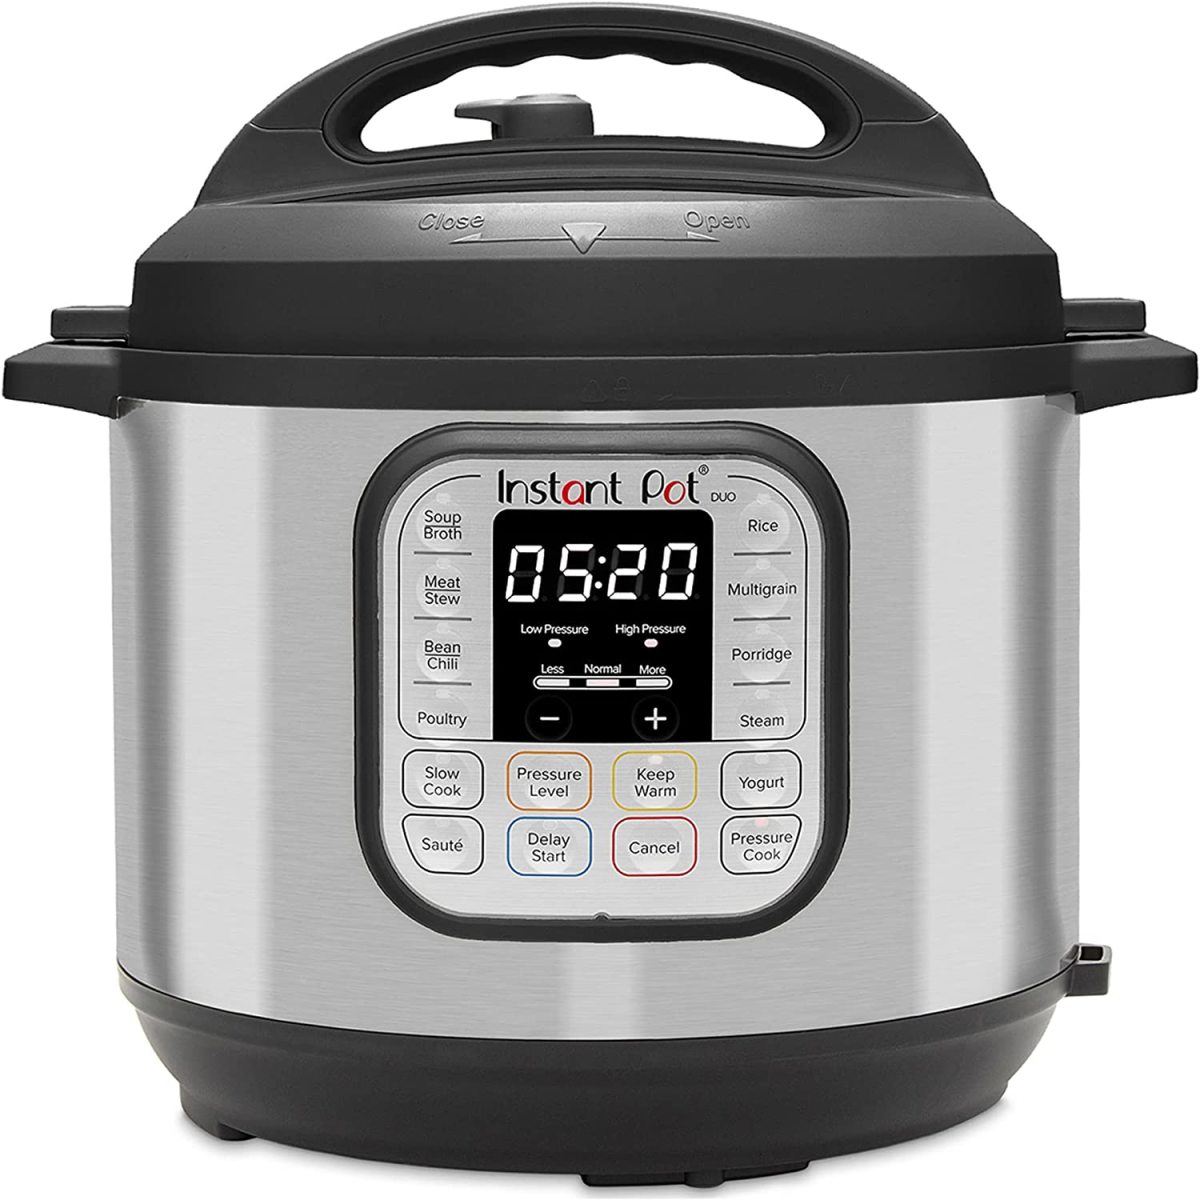 https://images.saymedia-content.com/.image/t_share/MTk5MzM3MTY0NDkwODc2ODc4/a-deep-dive-into-the-instant-pot-duo-7-in-1-electric-pressure-cooker.jpg